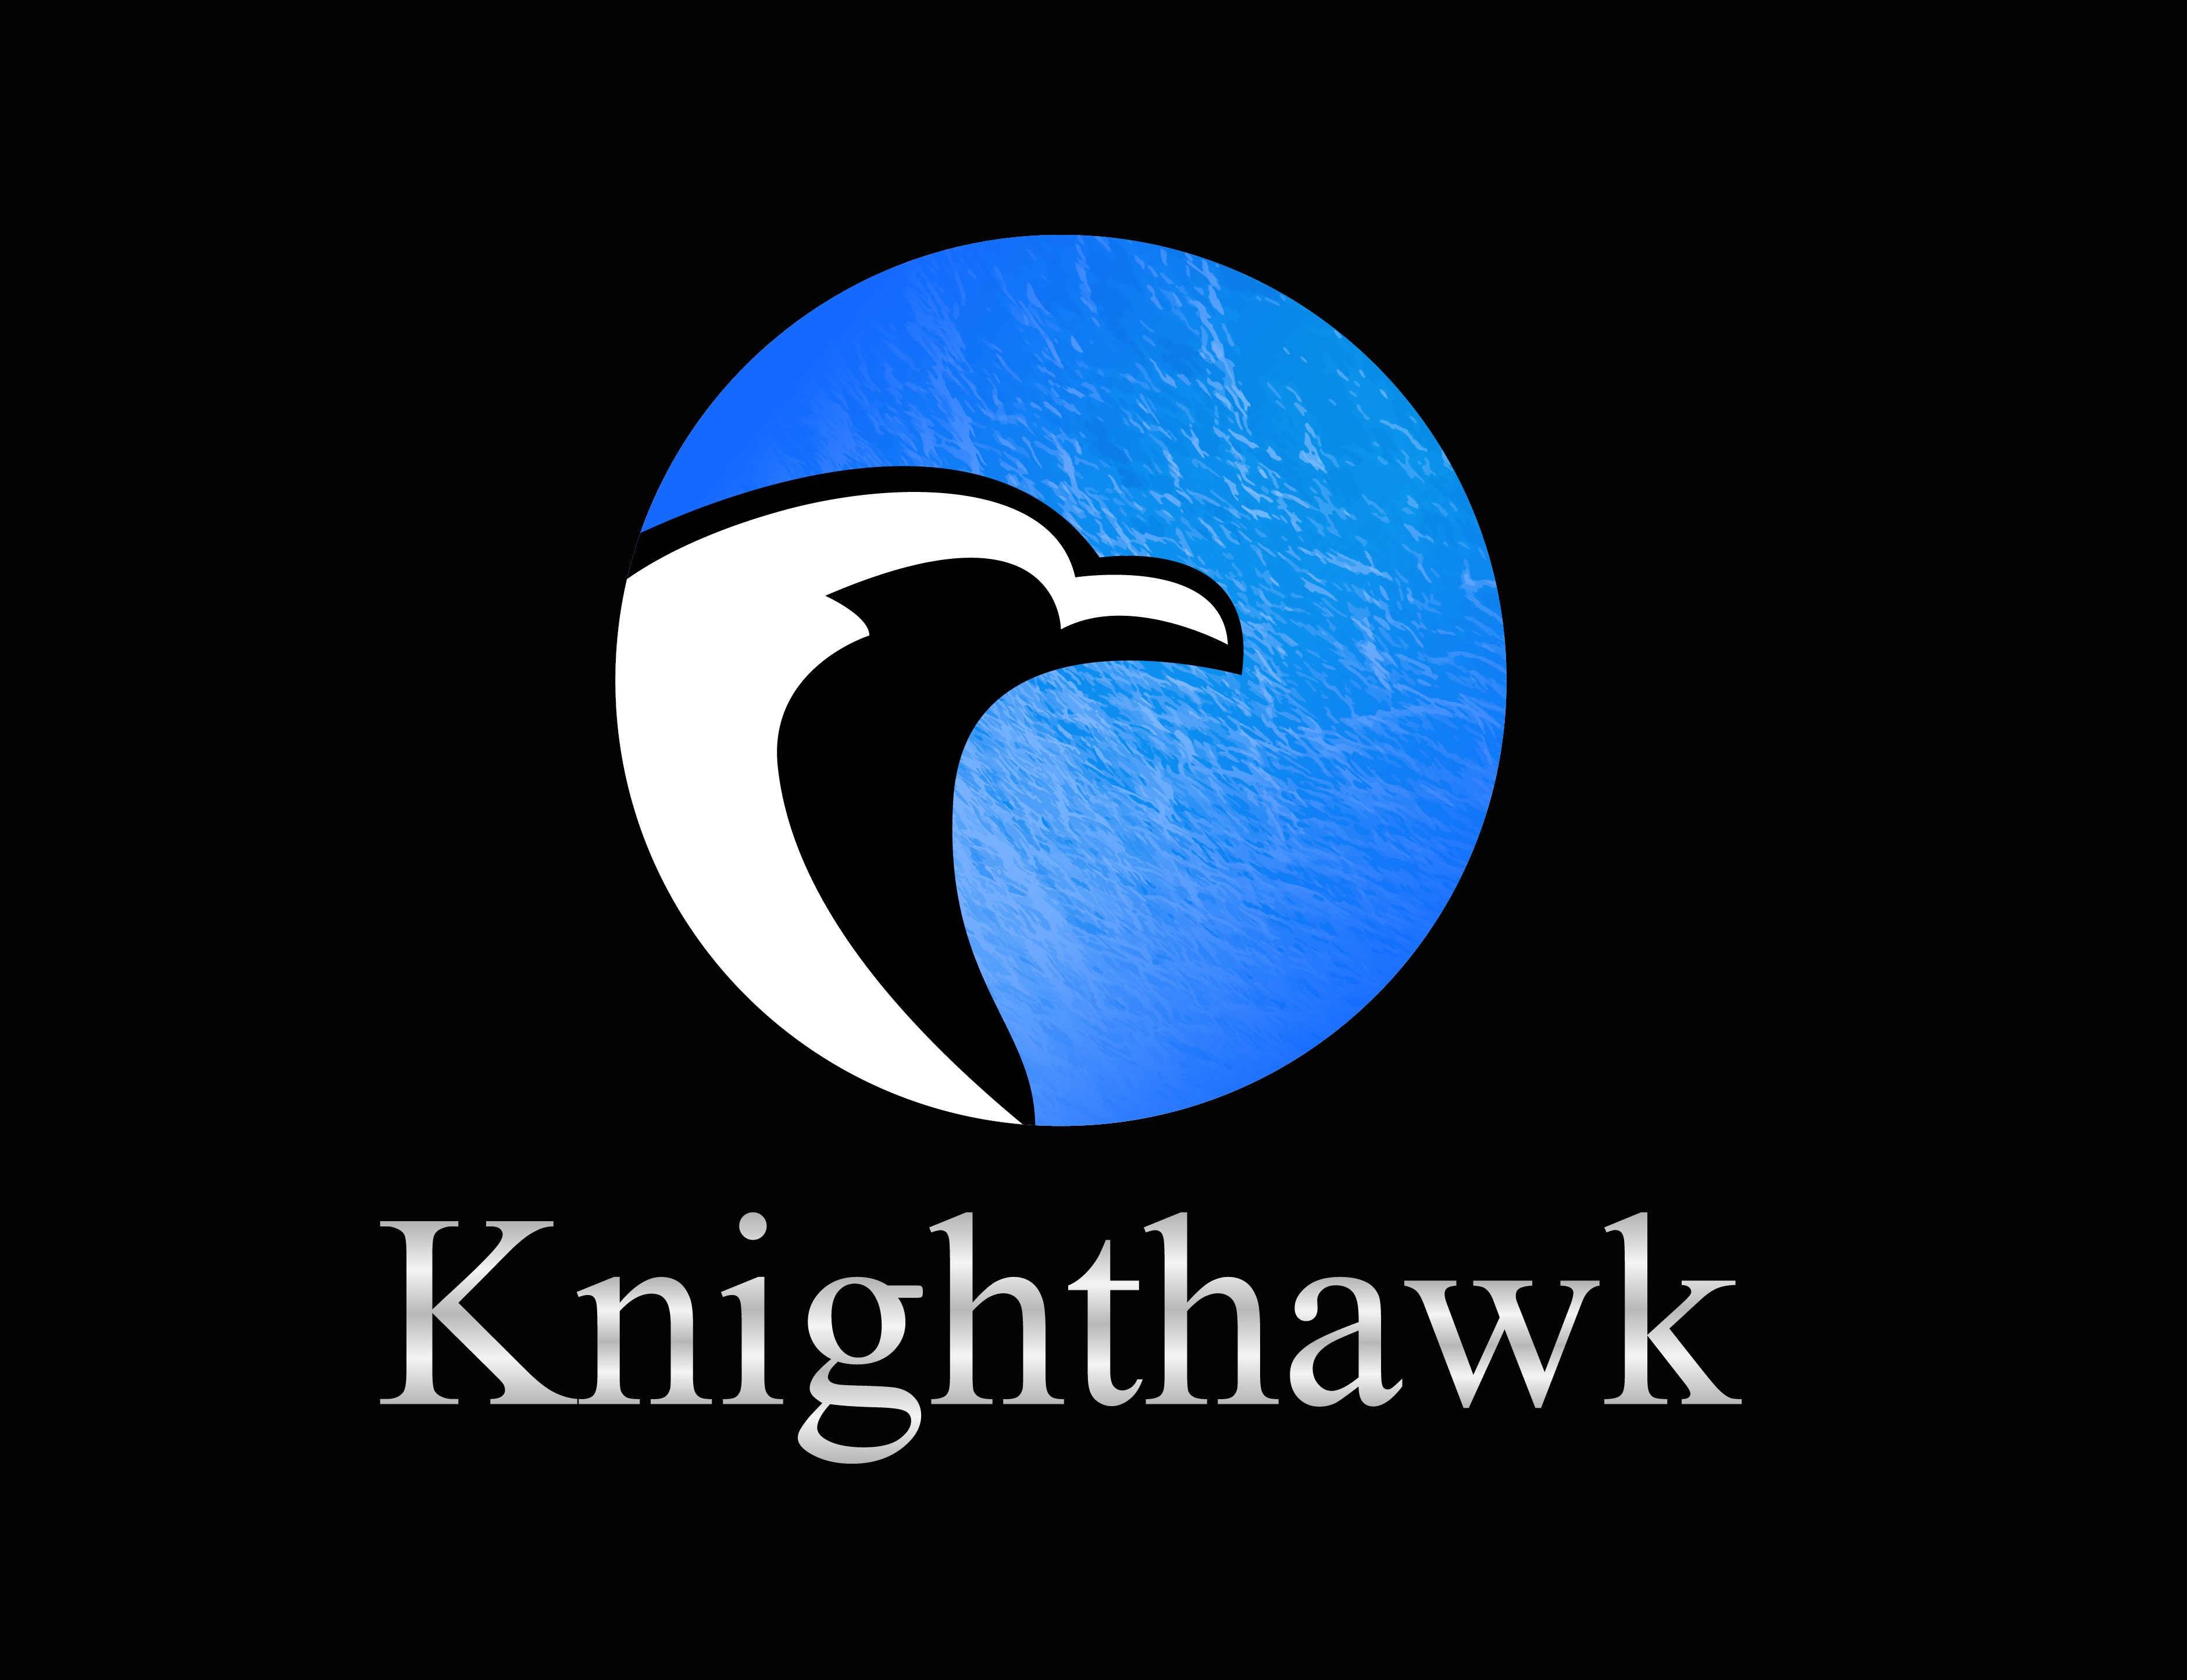 Knighthawk Late Night Delivery